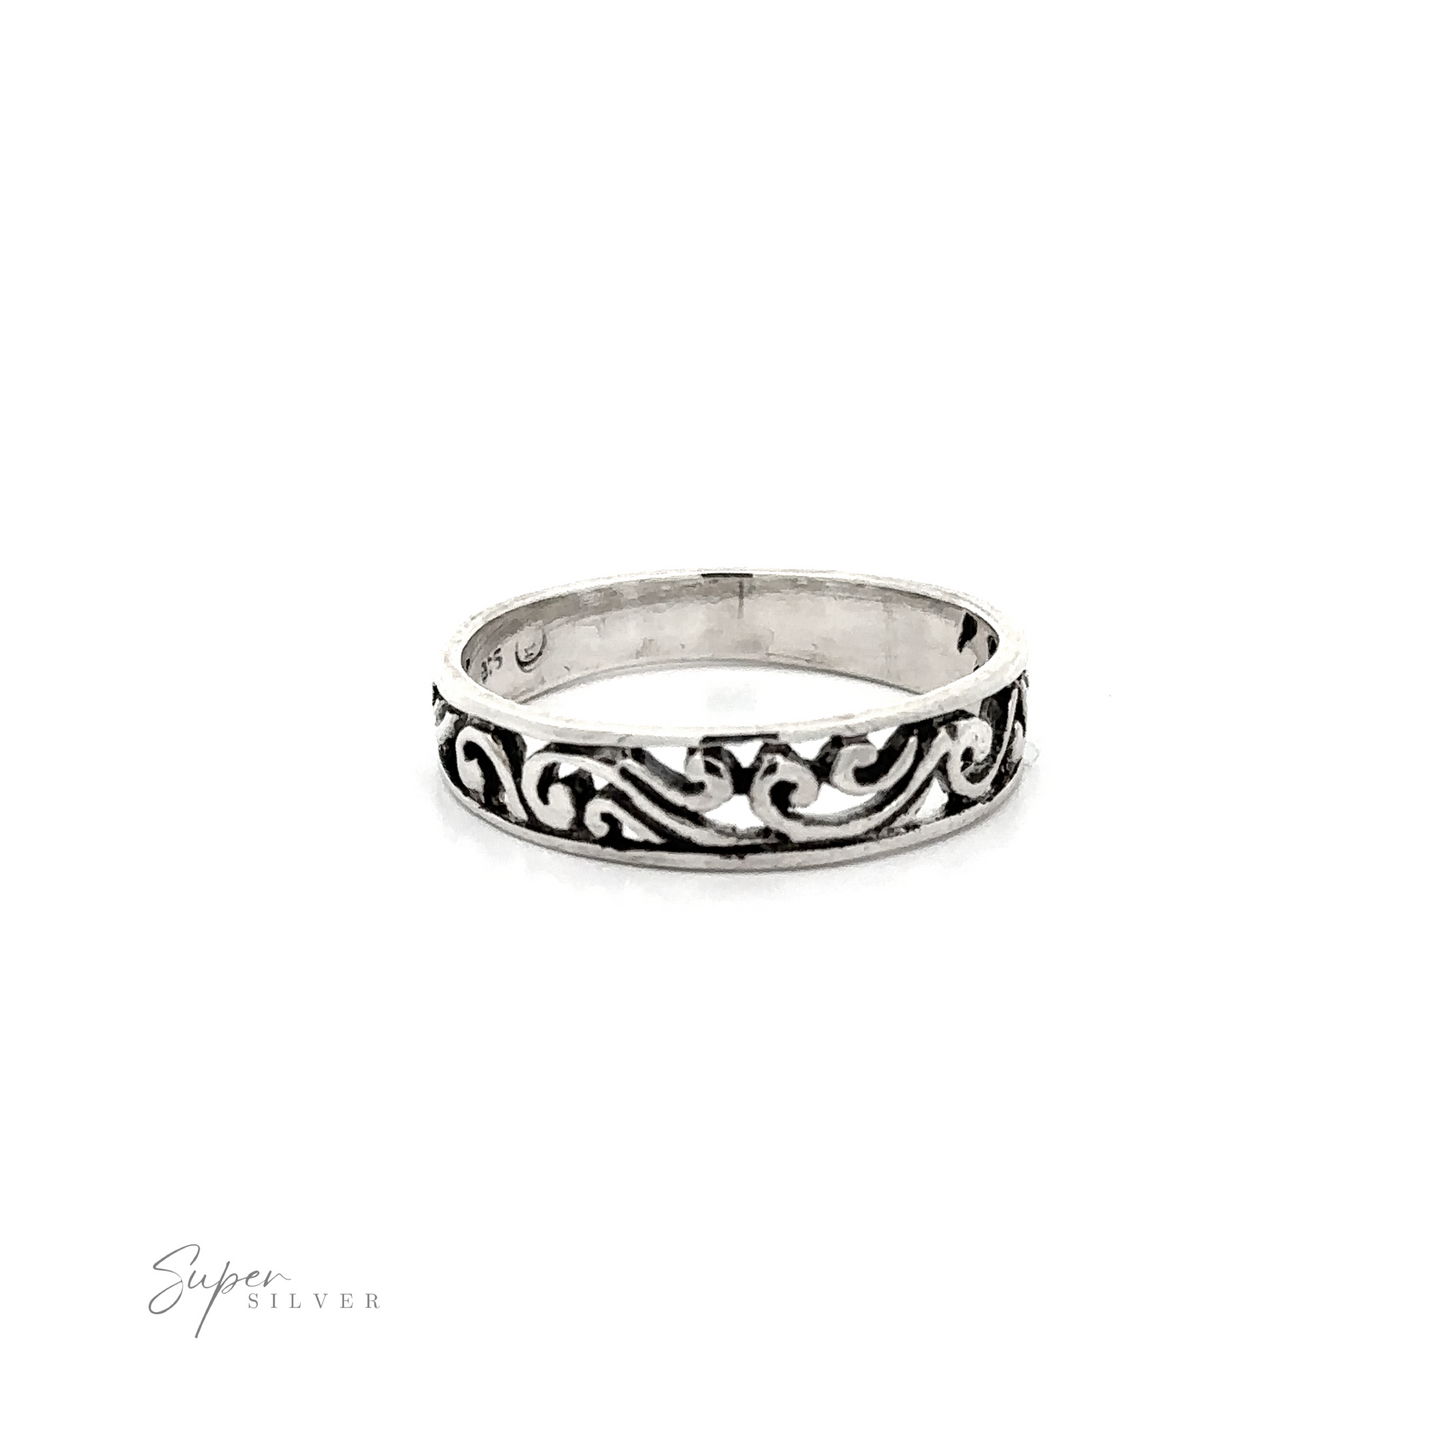 A beautiful open filigree band with a filigree design.